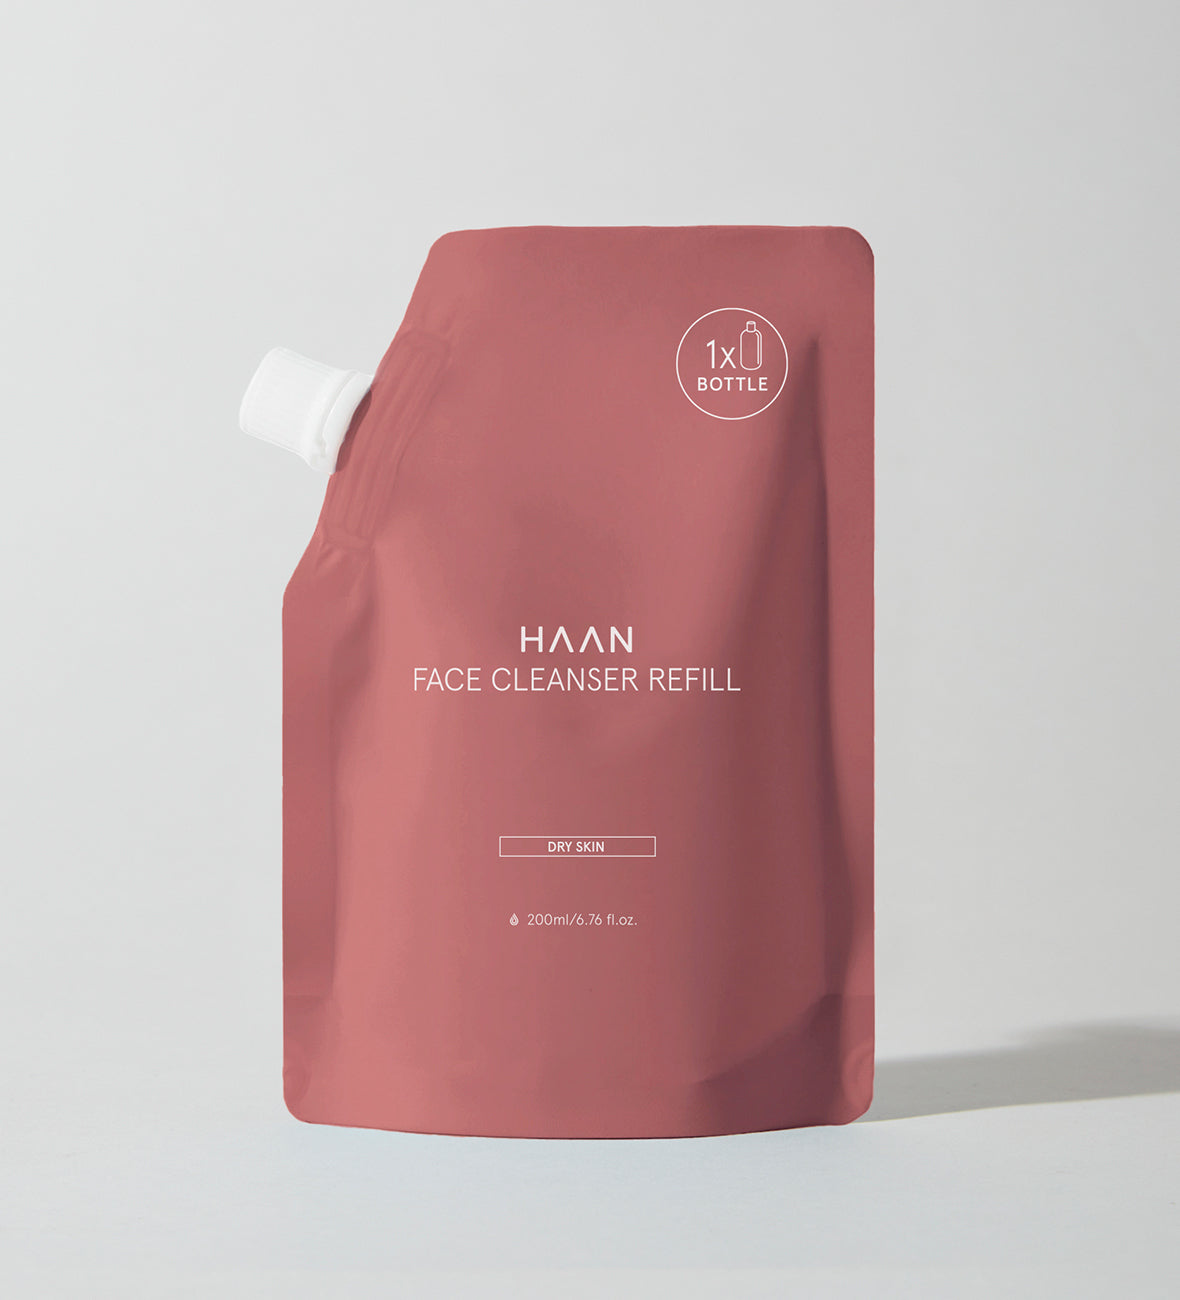 HAAN FACE CLEANSER REFILL | Dry Skin